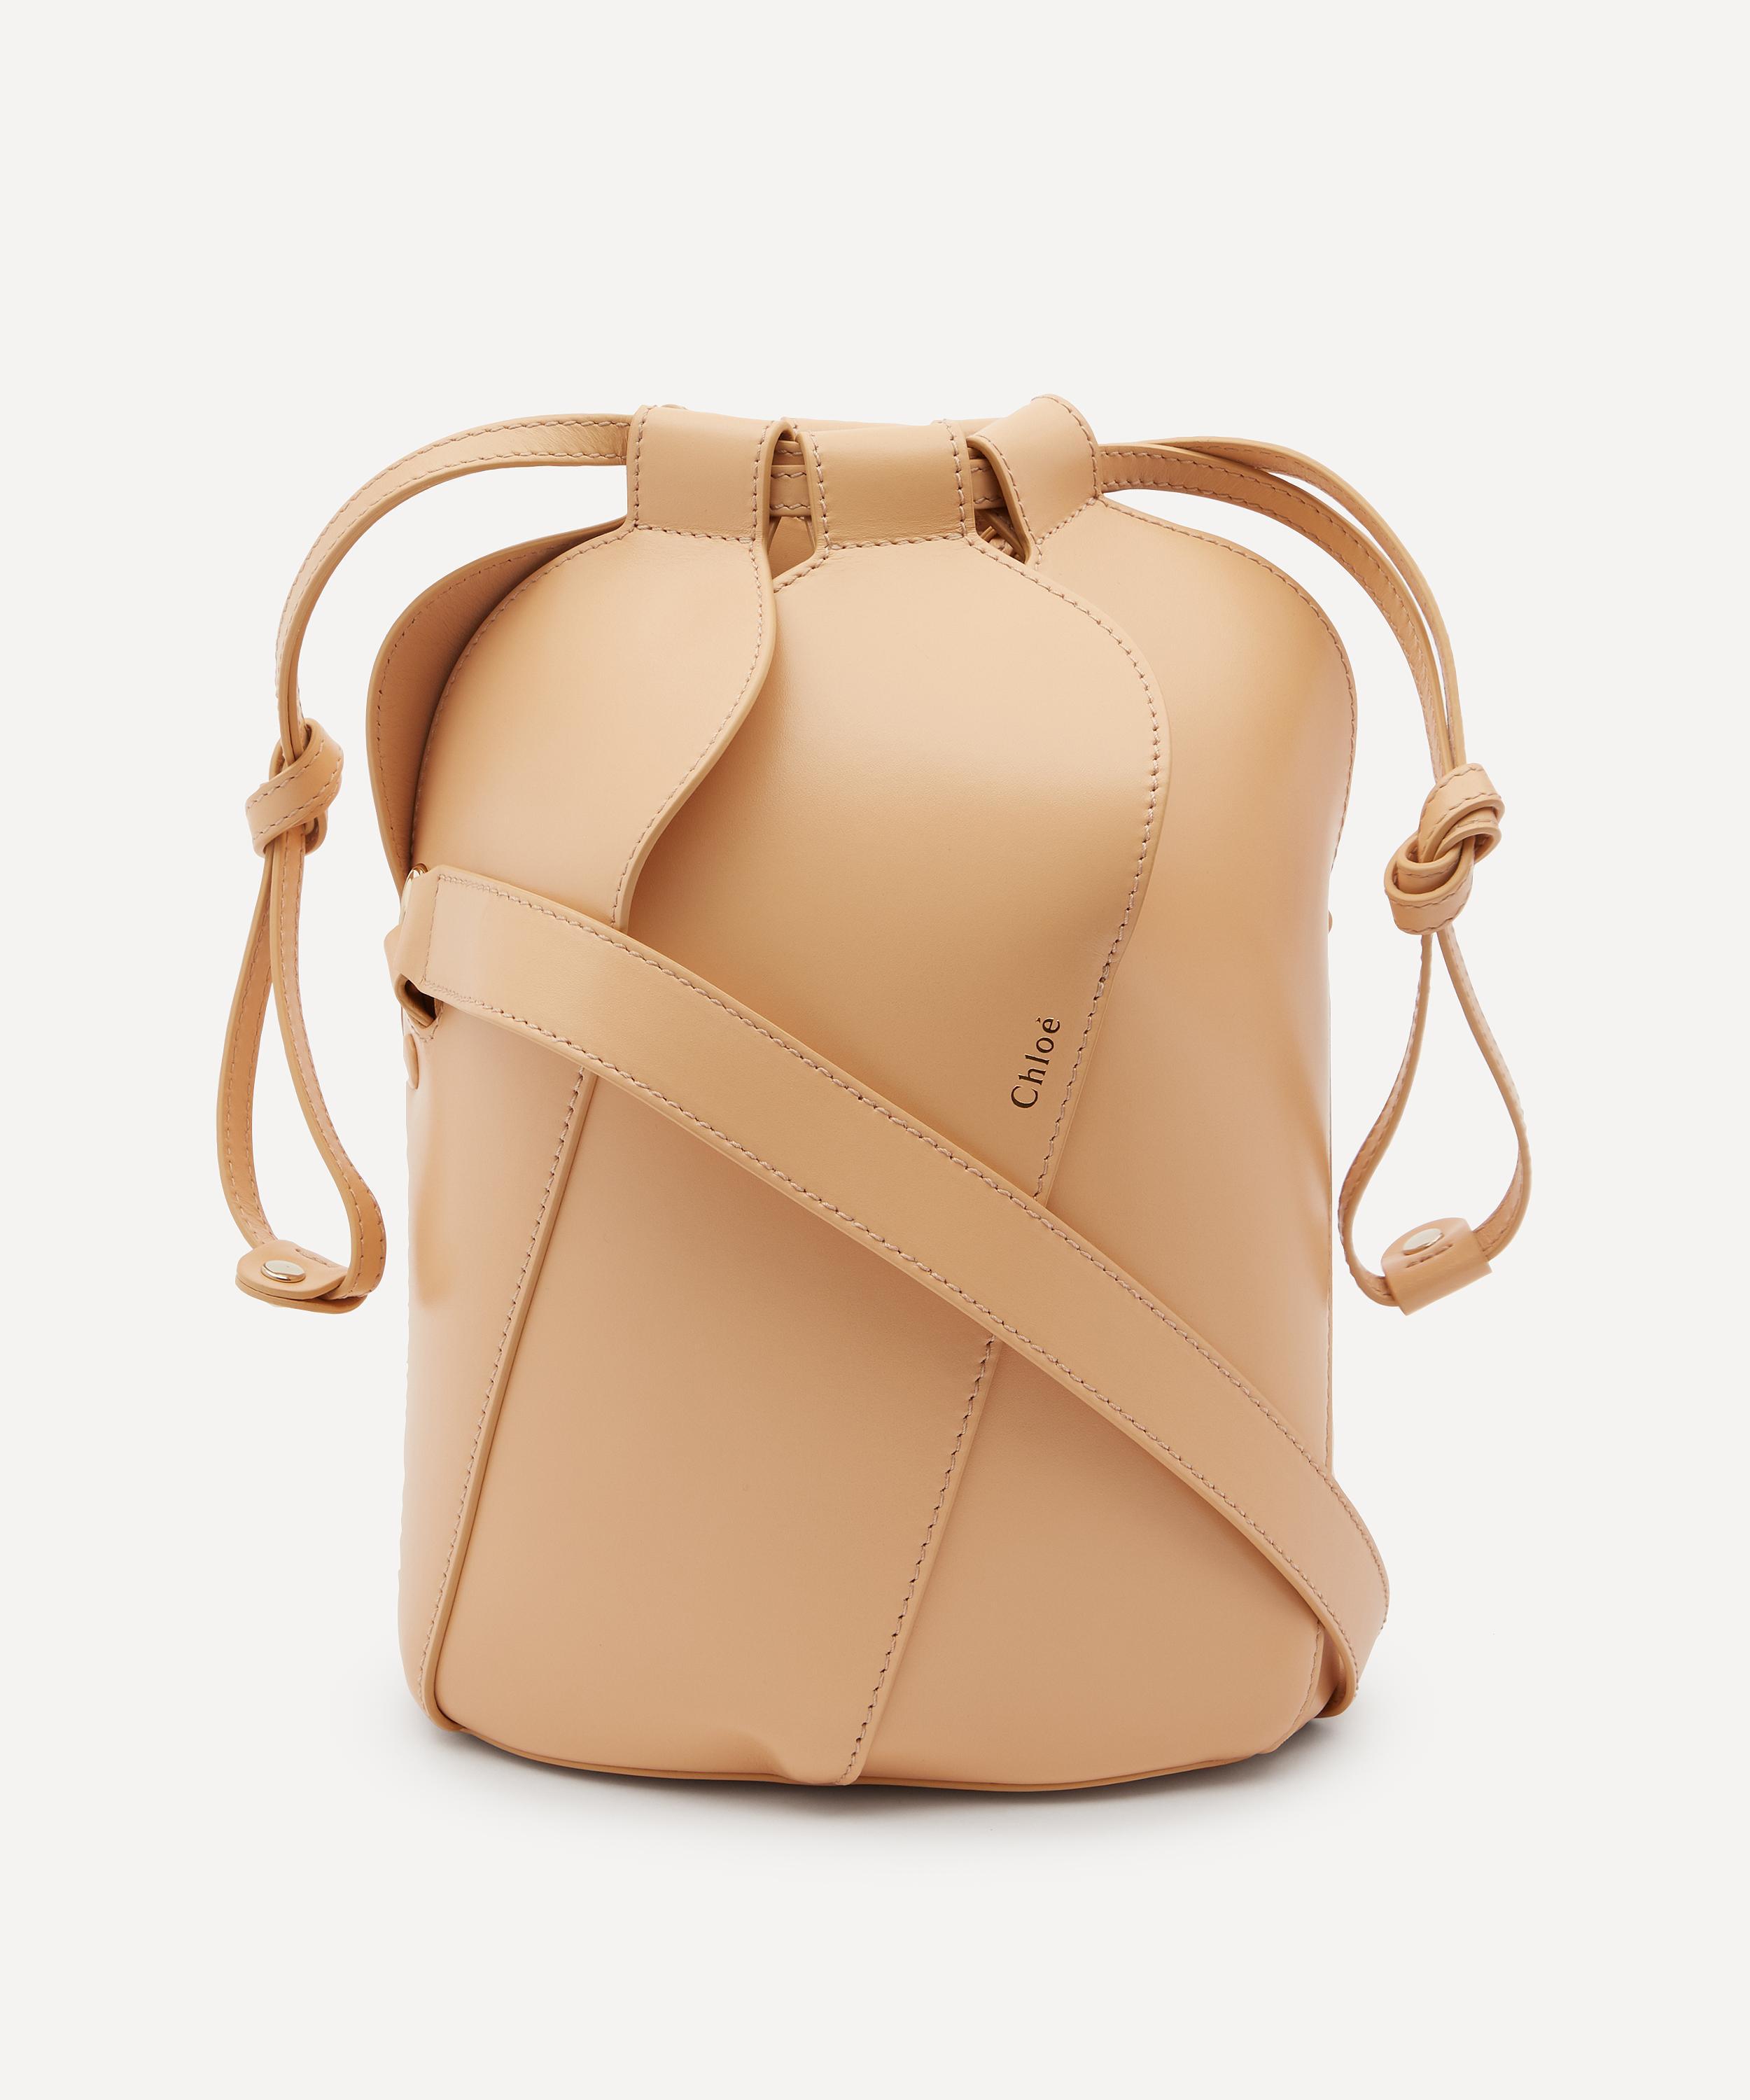 Chloé Tulip Small Leather Bucket Bag in Natural - Lyst